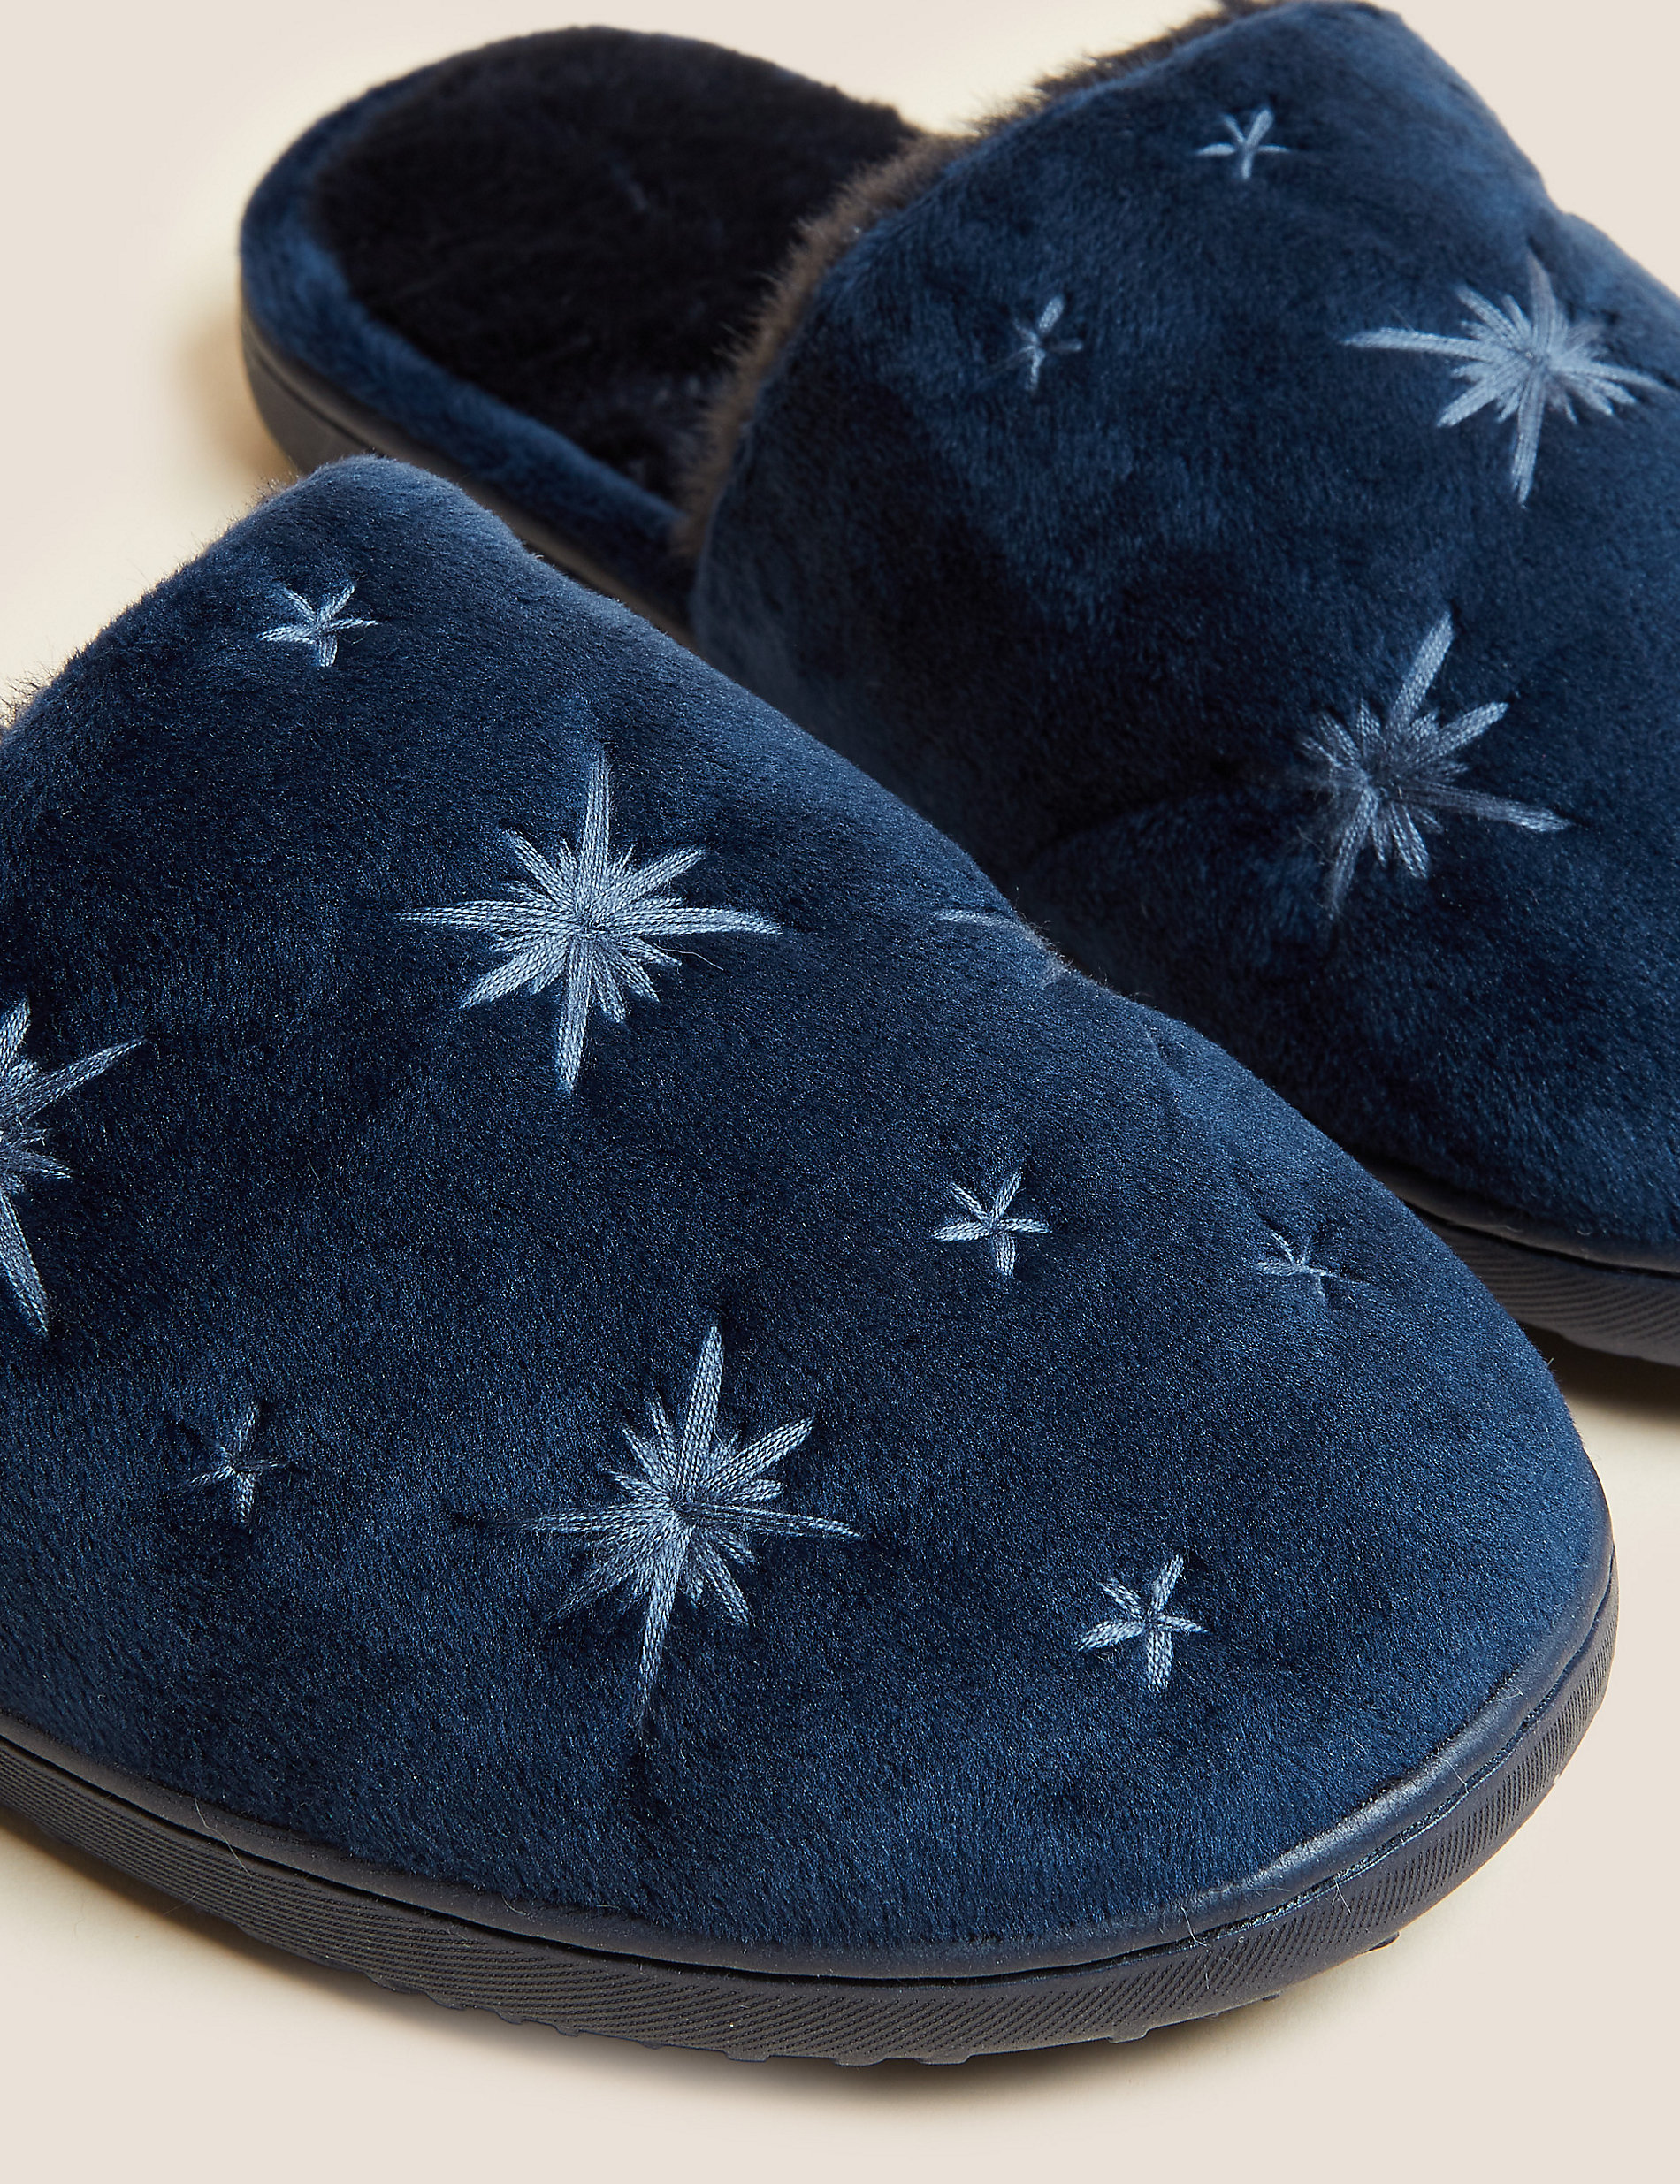 Embroidered Slippers with Secret Support